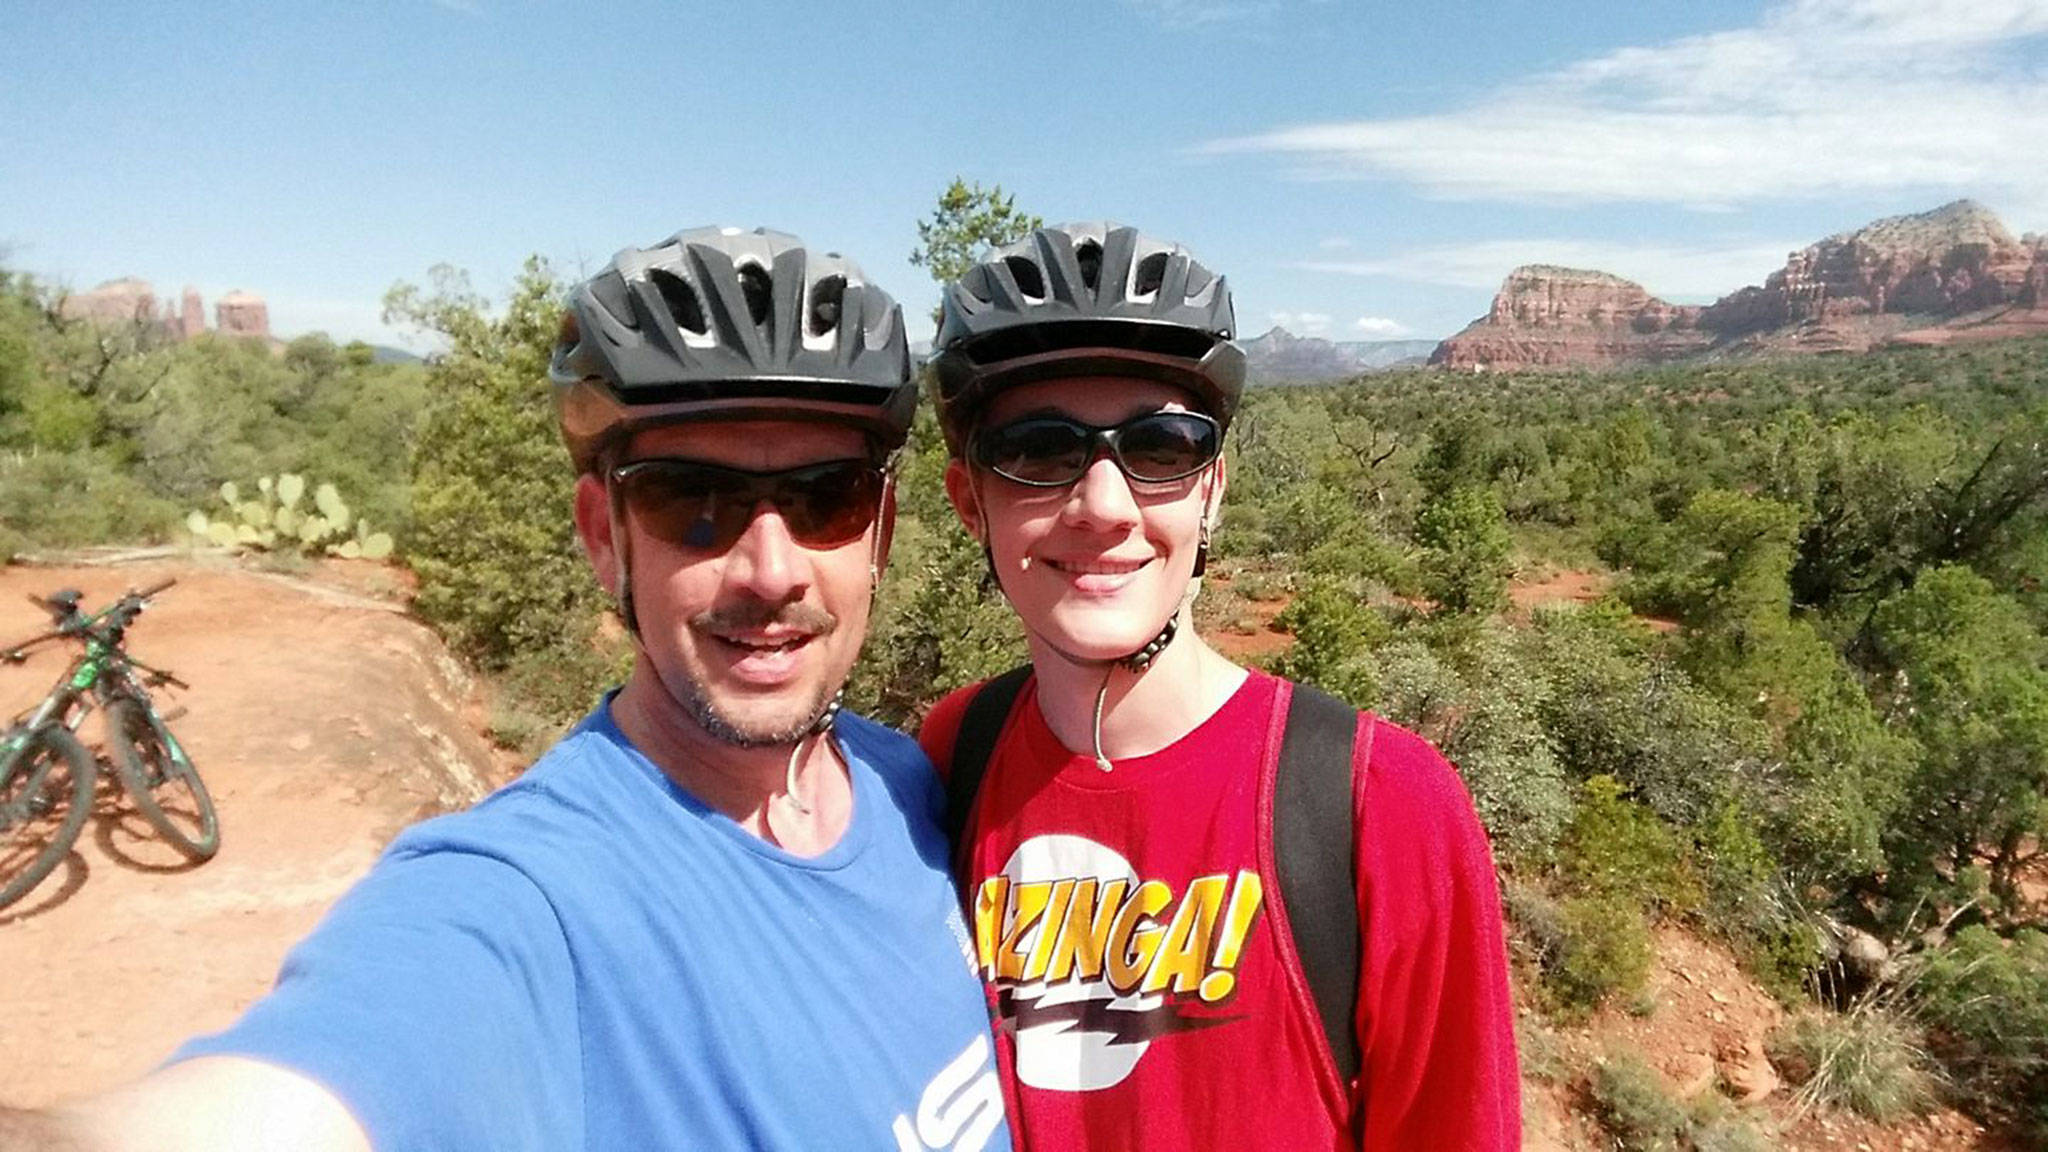 Robert Streett of Sequim takes a photo with his son Robby, 16, near Sedona, Ariz., last week on vacation. The father and son died the next day in a car wreck in Colorado on July 20. They are survived by Josslyn, Robert’s wife, and son, Sawyer, 14, who also were in the vehicle during the crash. Facebook image